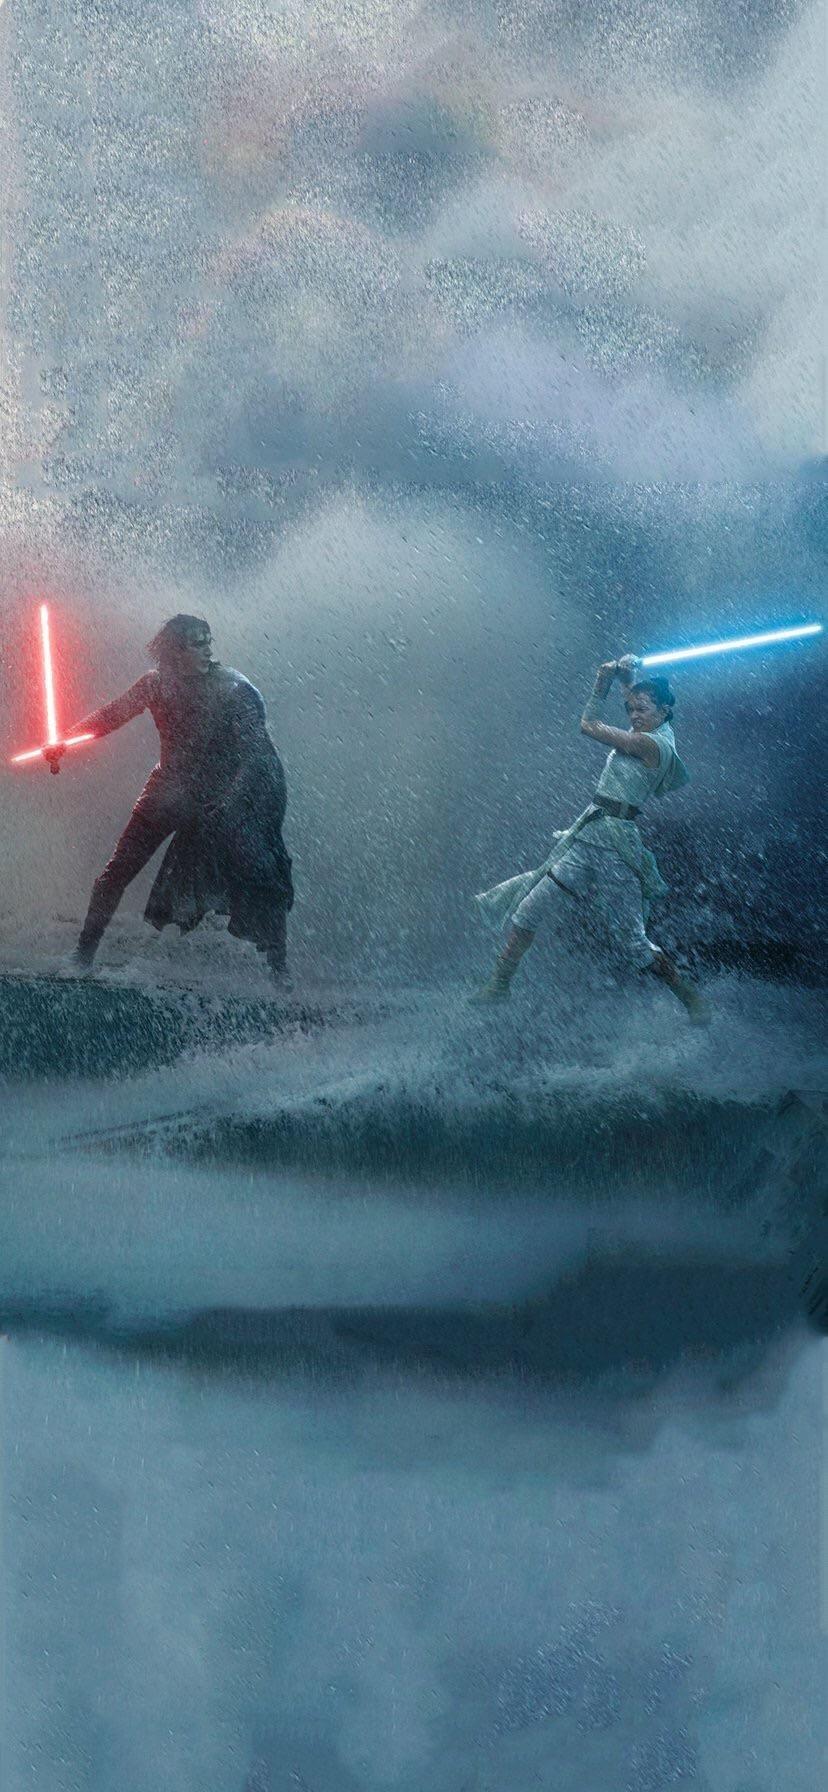 Here is that Rey and Kylo Ren fighting in the rain wallpaper. Star wars background, Star wars poster, Star wars wallpaper iphone